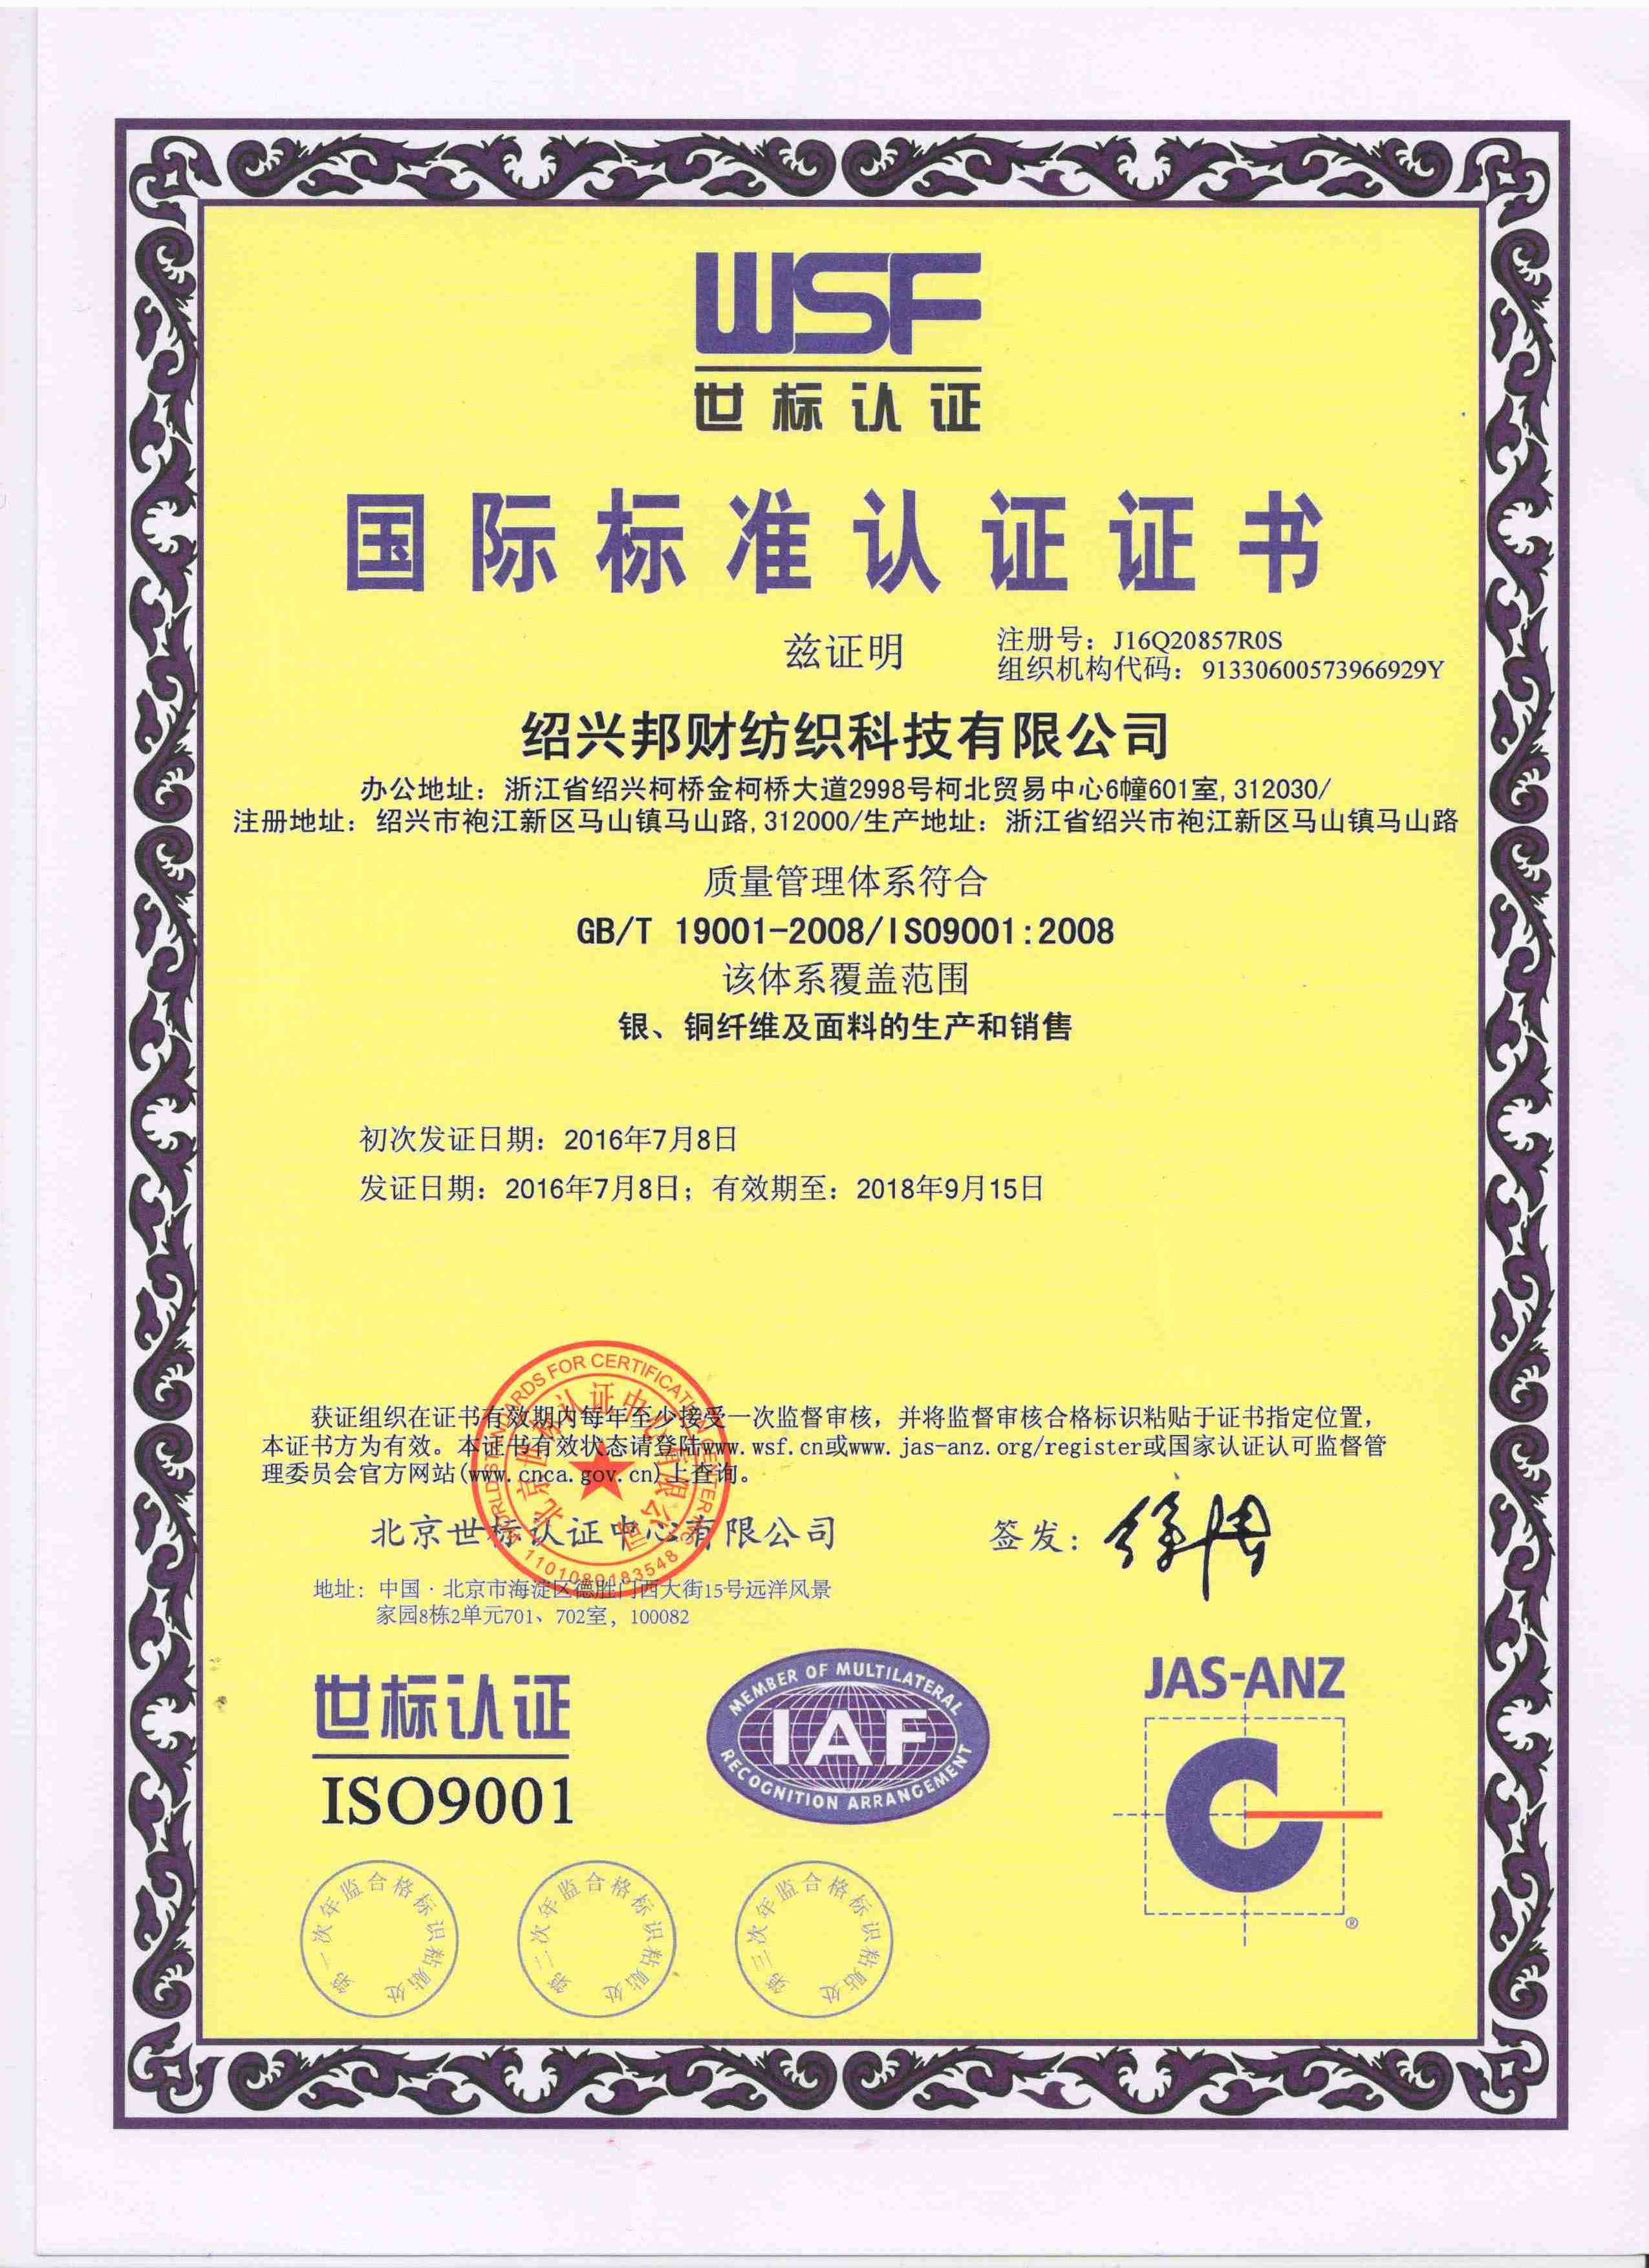 The company has passed ISO9001 certification